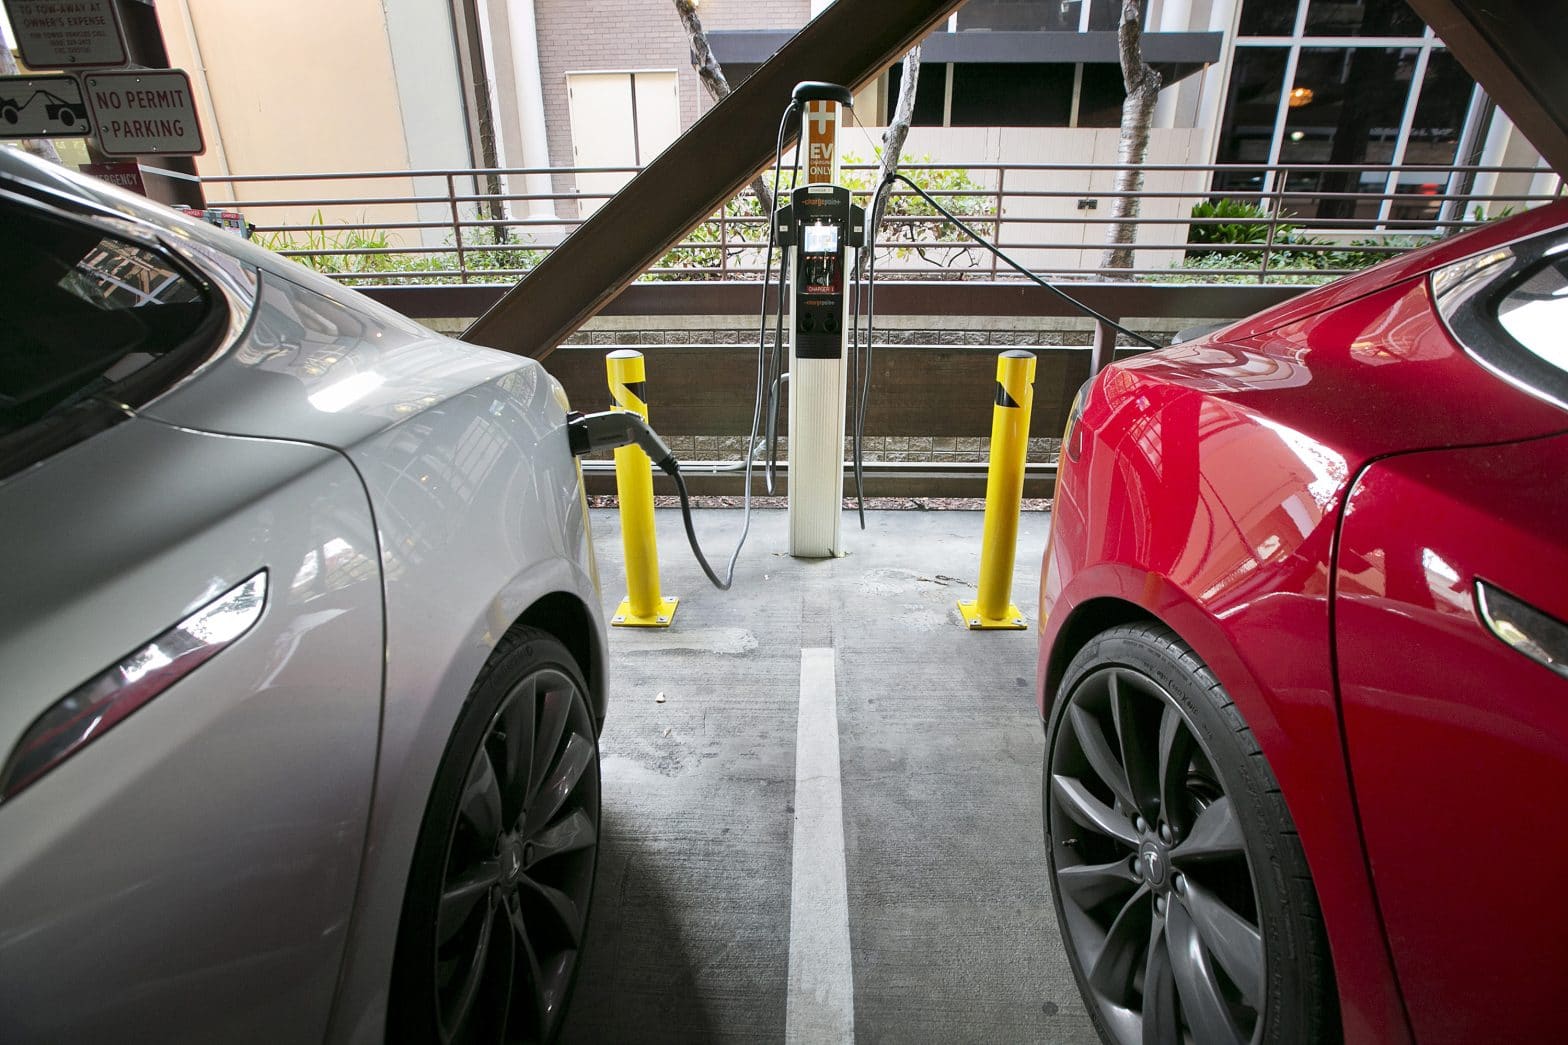 Electric Vehicle Sales Are Up, But in Some States Charging Stations Are Hard to Find